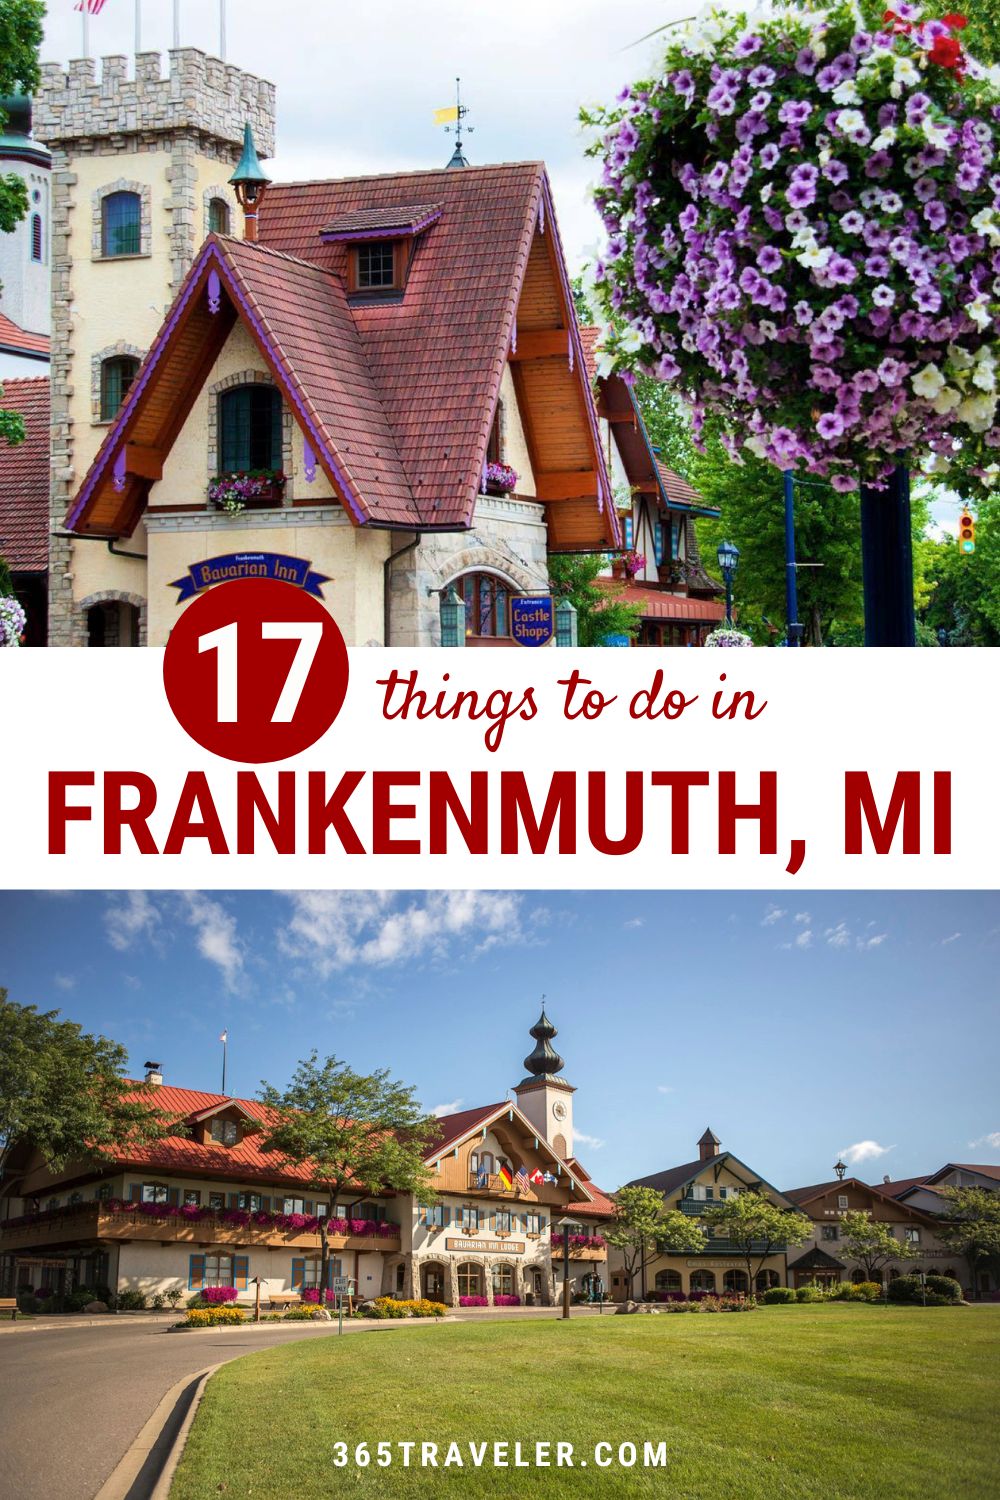 17 Amazing Things To Do in Frankenmuth, Michigan